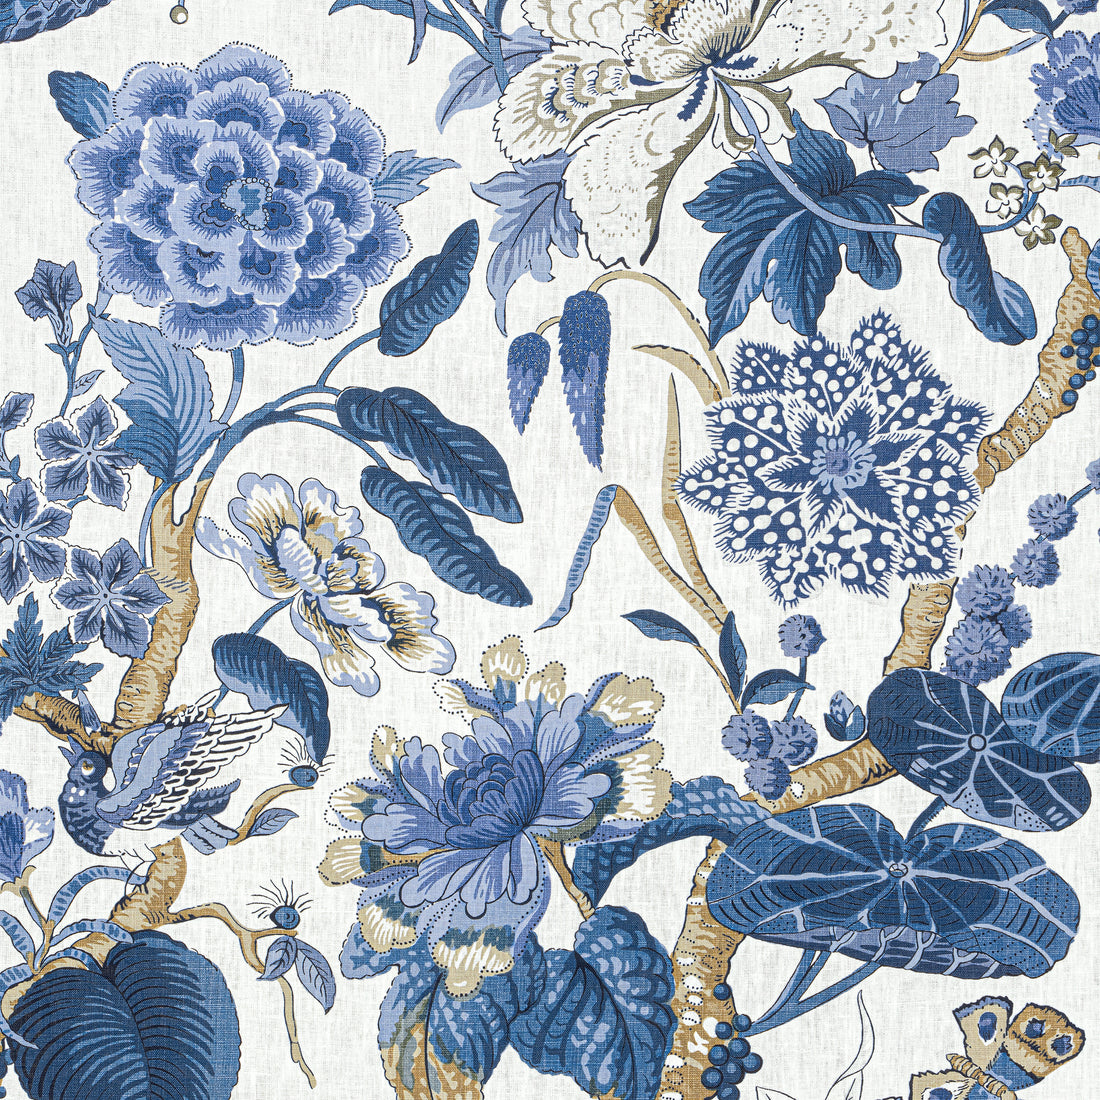 Hill Garden fabric in blue and white - pattern number F913659 - by Thibaut in the Grand Palace collection